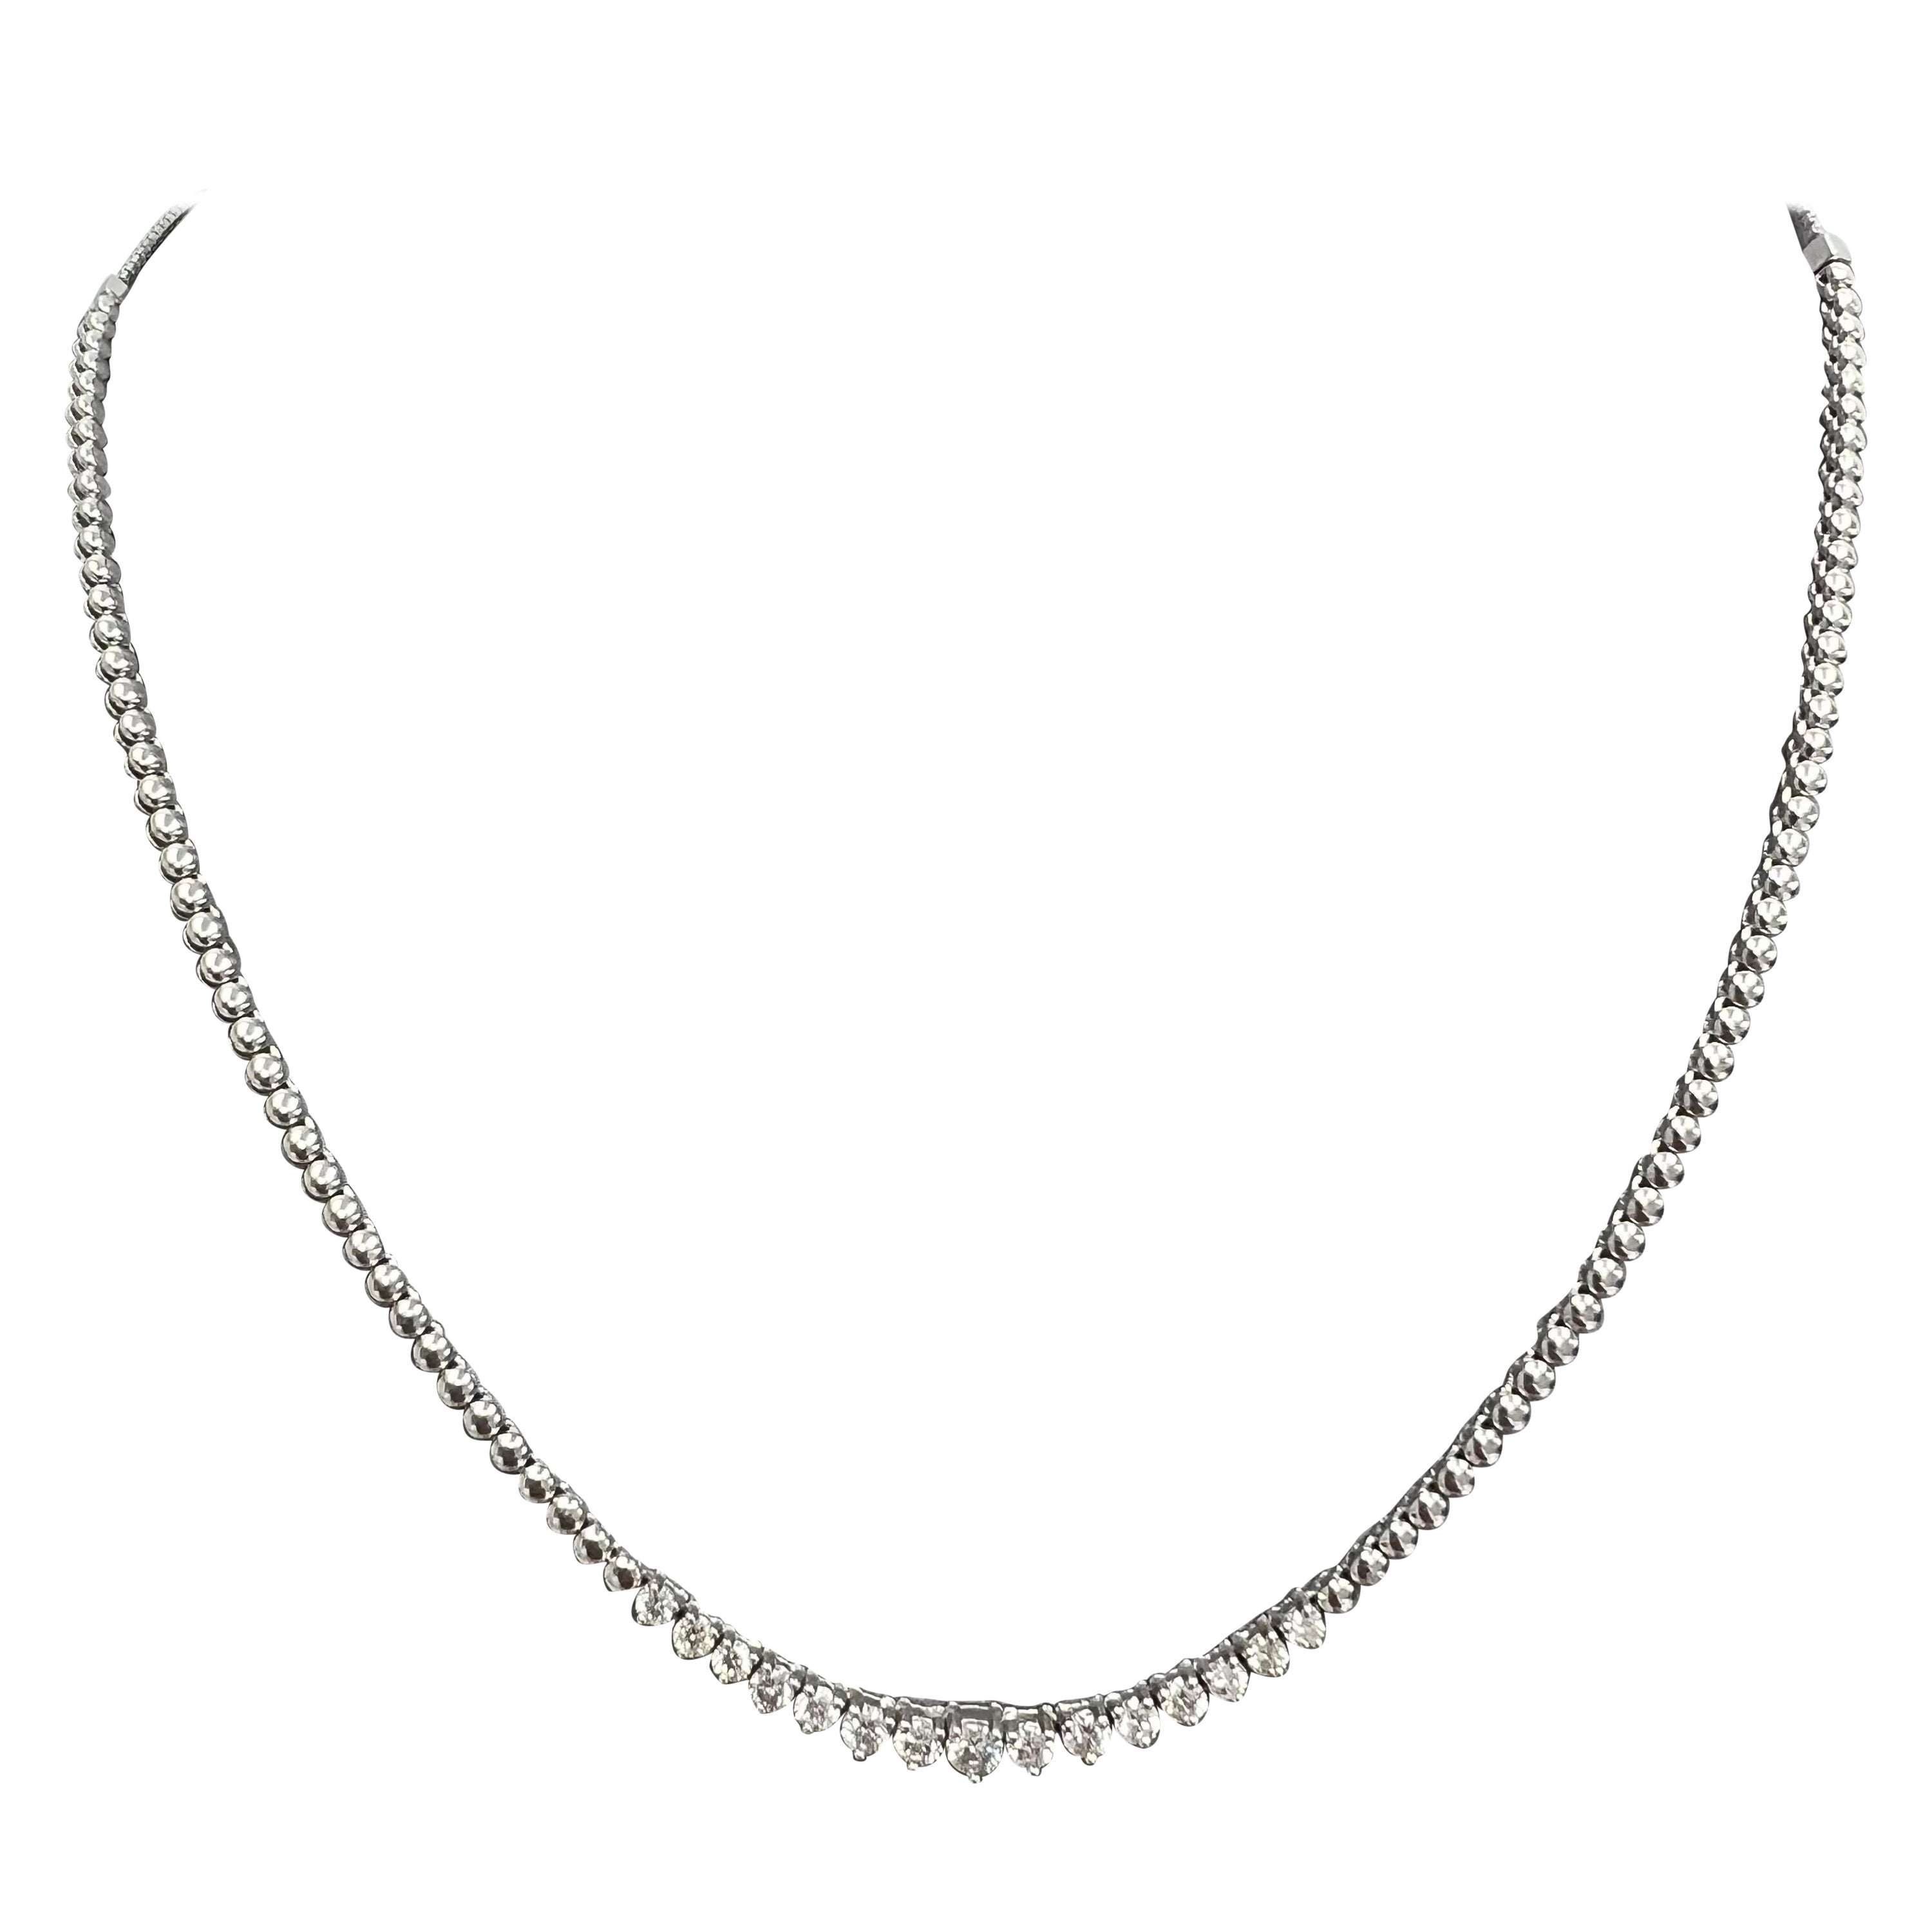 Unique Diamond Necklace with a Pull-up Chain and Graduated Diamonds.
This is the perfect gift for your friends, family and lovers.
No need to know their neck size, because the pull-up chain, gives you the ability to extend the necklace as long as